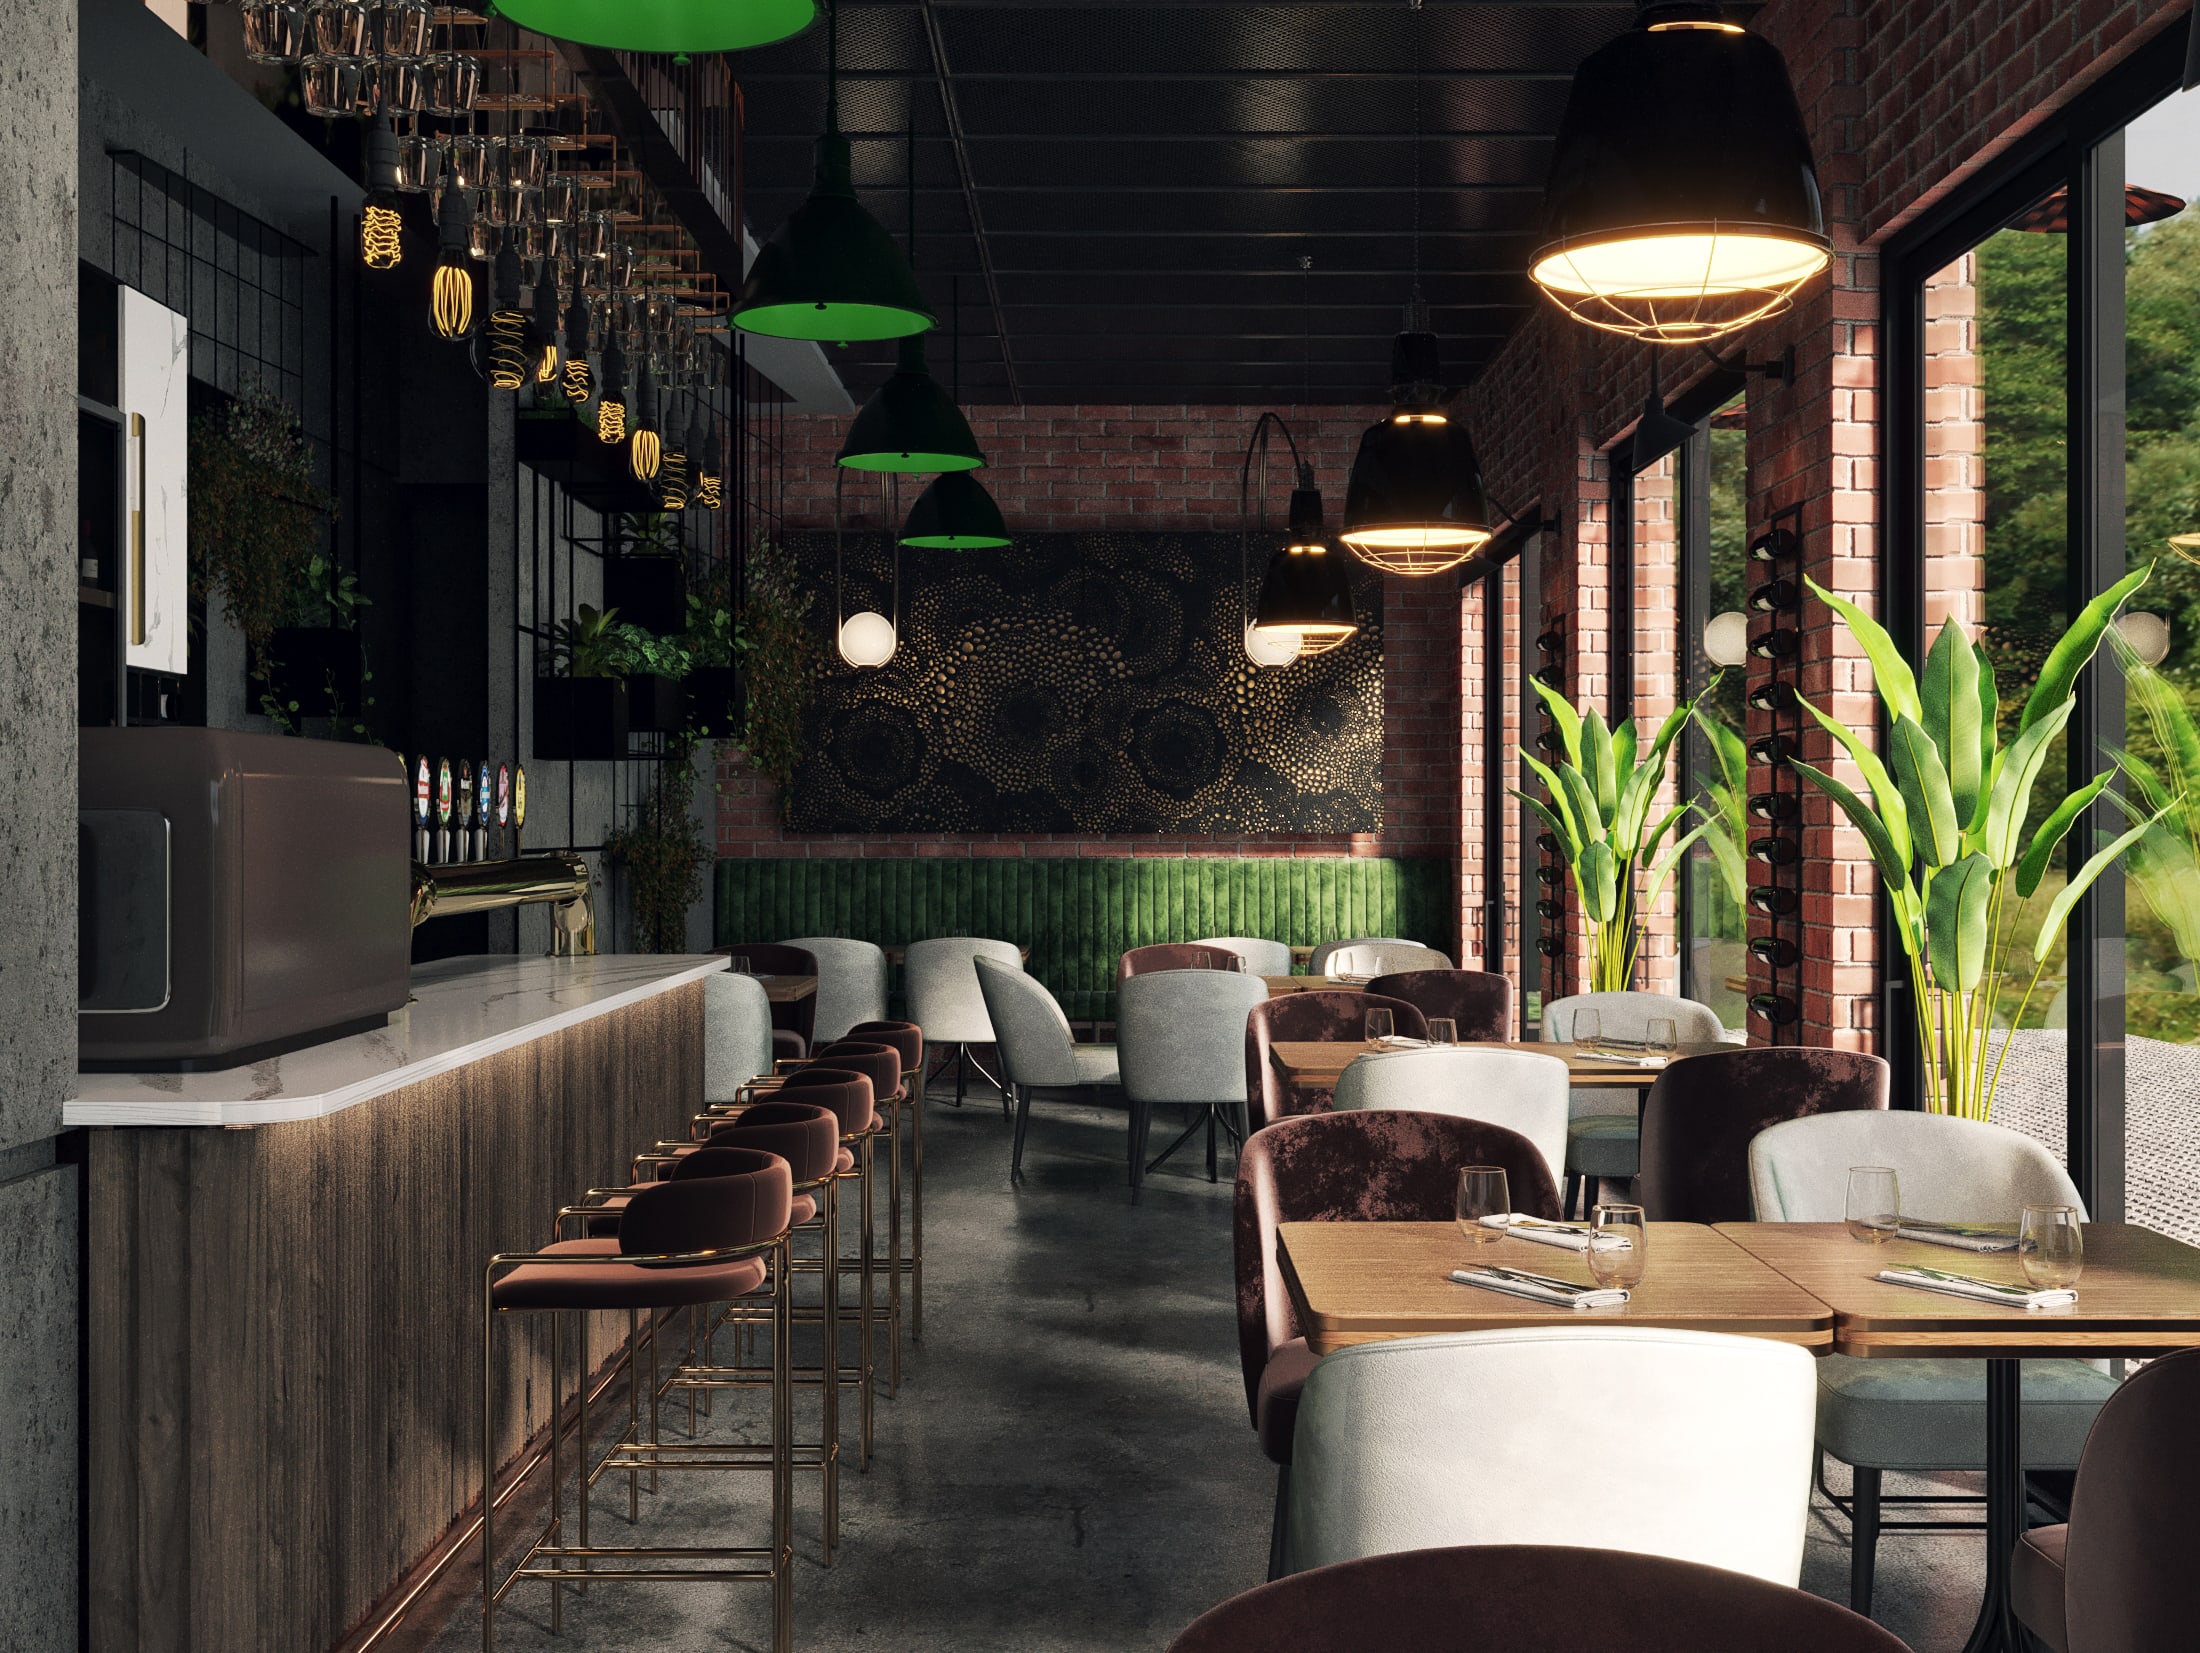 Design Model And Render Your Bar And Restaurant Interior 